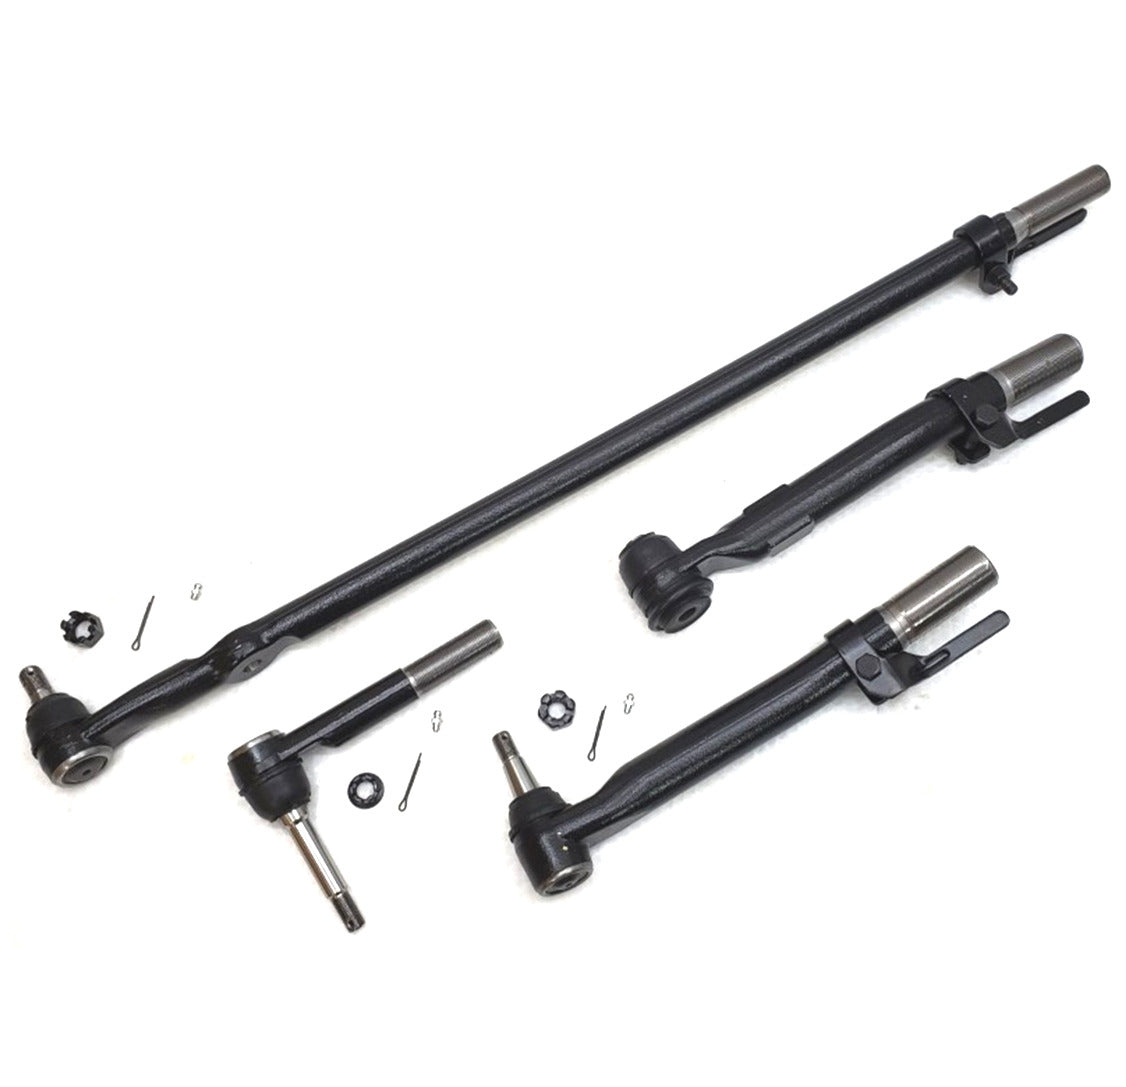 HD Drag Link Tie Rod End Steering Kit for 2005-2010 Ford F450, F550 Super Duty